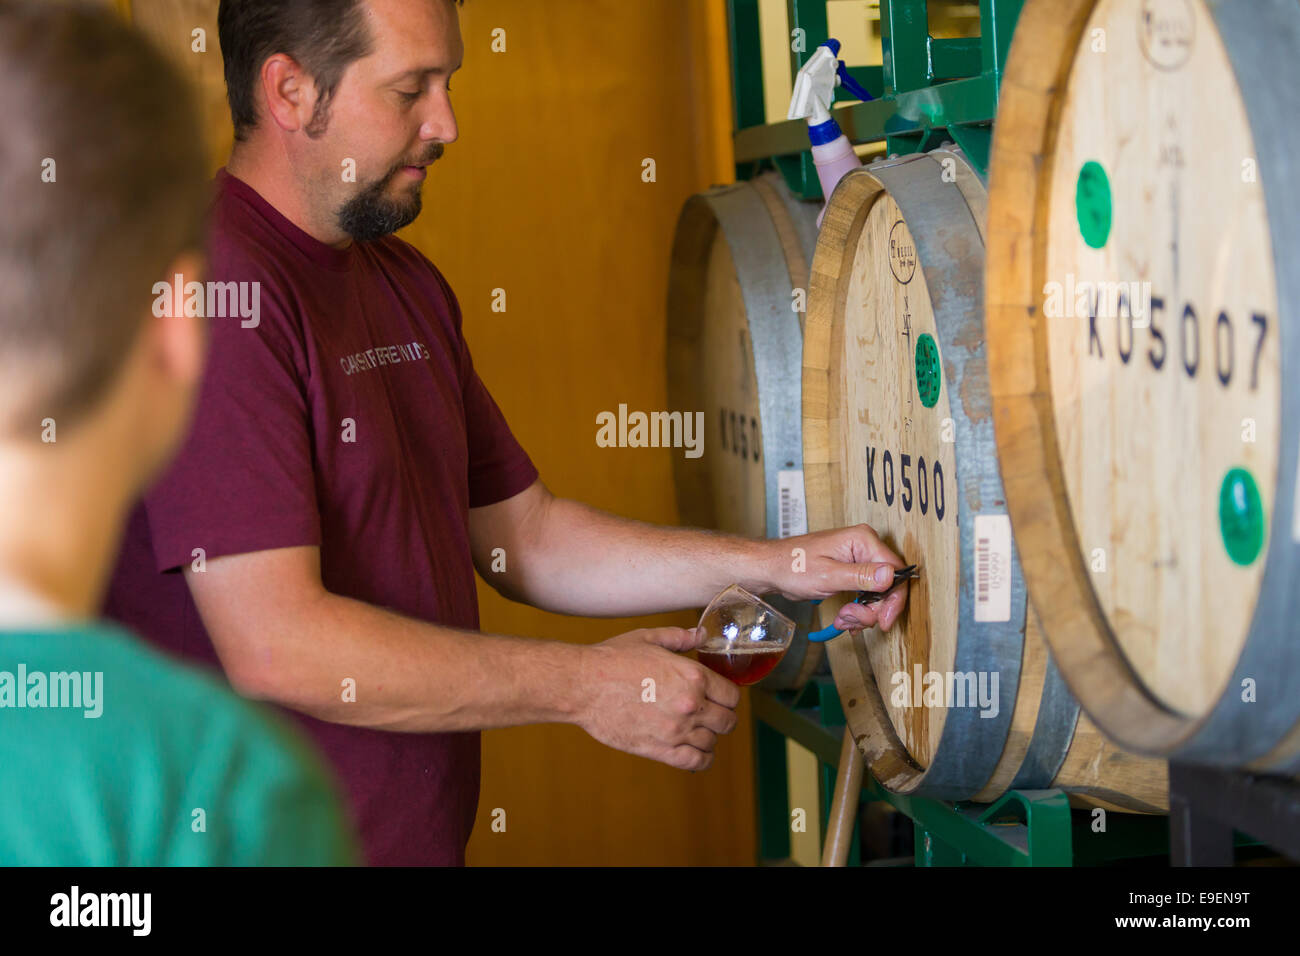 Eugene, OR, USA - July 17, 2014: Master brewer and employee sampling and tasting limited edition bourbon barrel aged beers at Oa Stock Photo